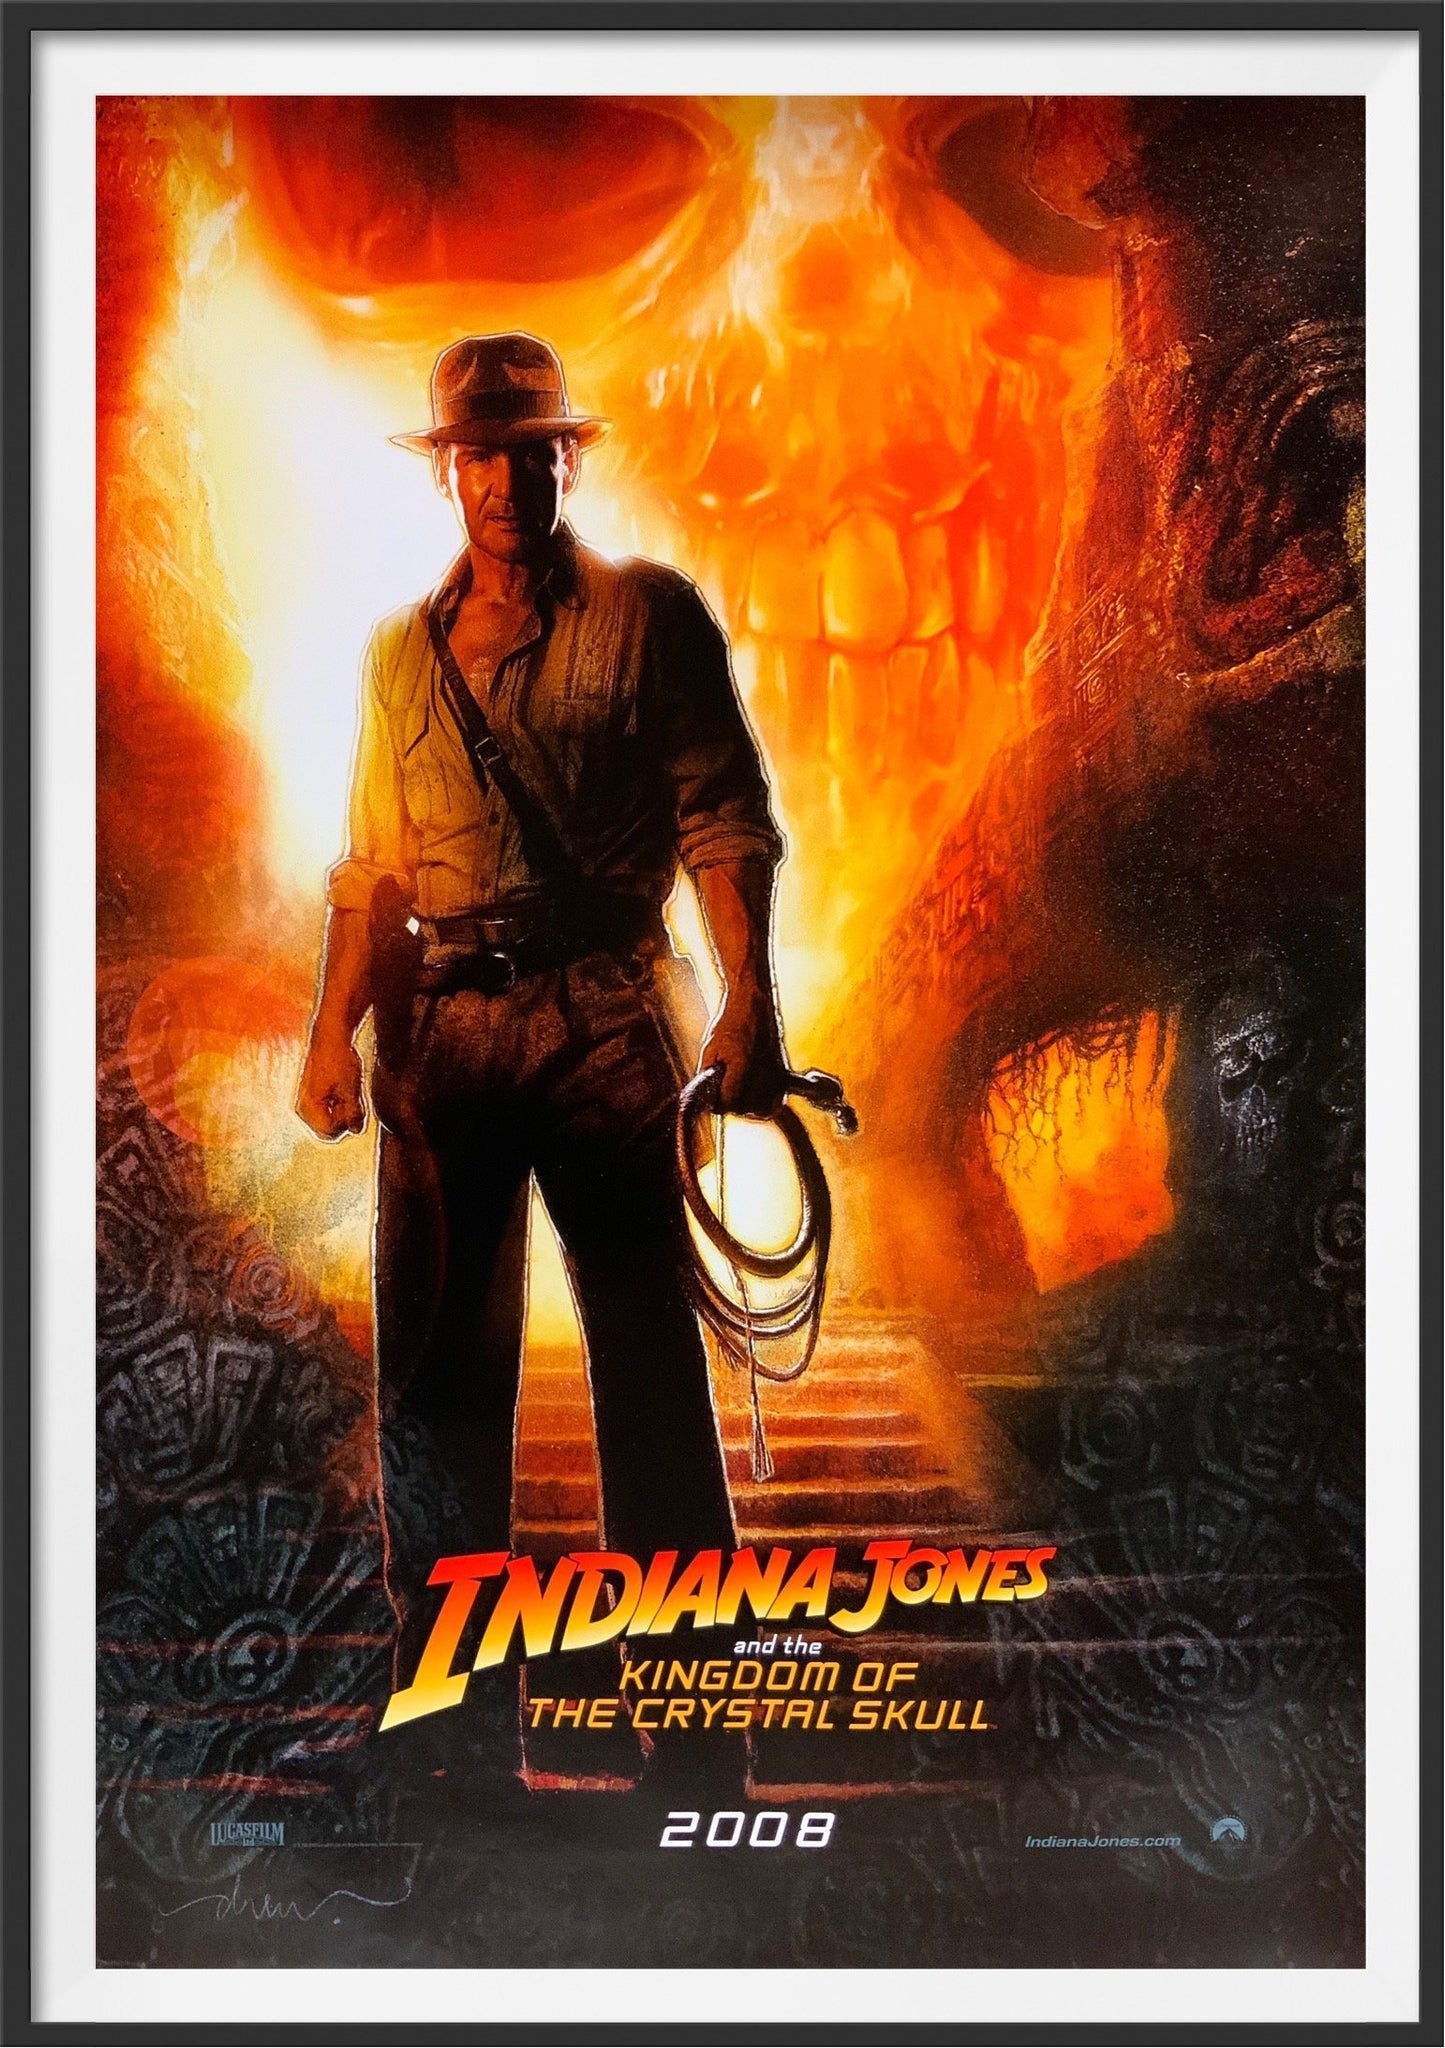 Opening To Indiana Jones and The Kingdom of The Crystal Skull 2008